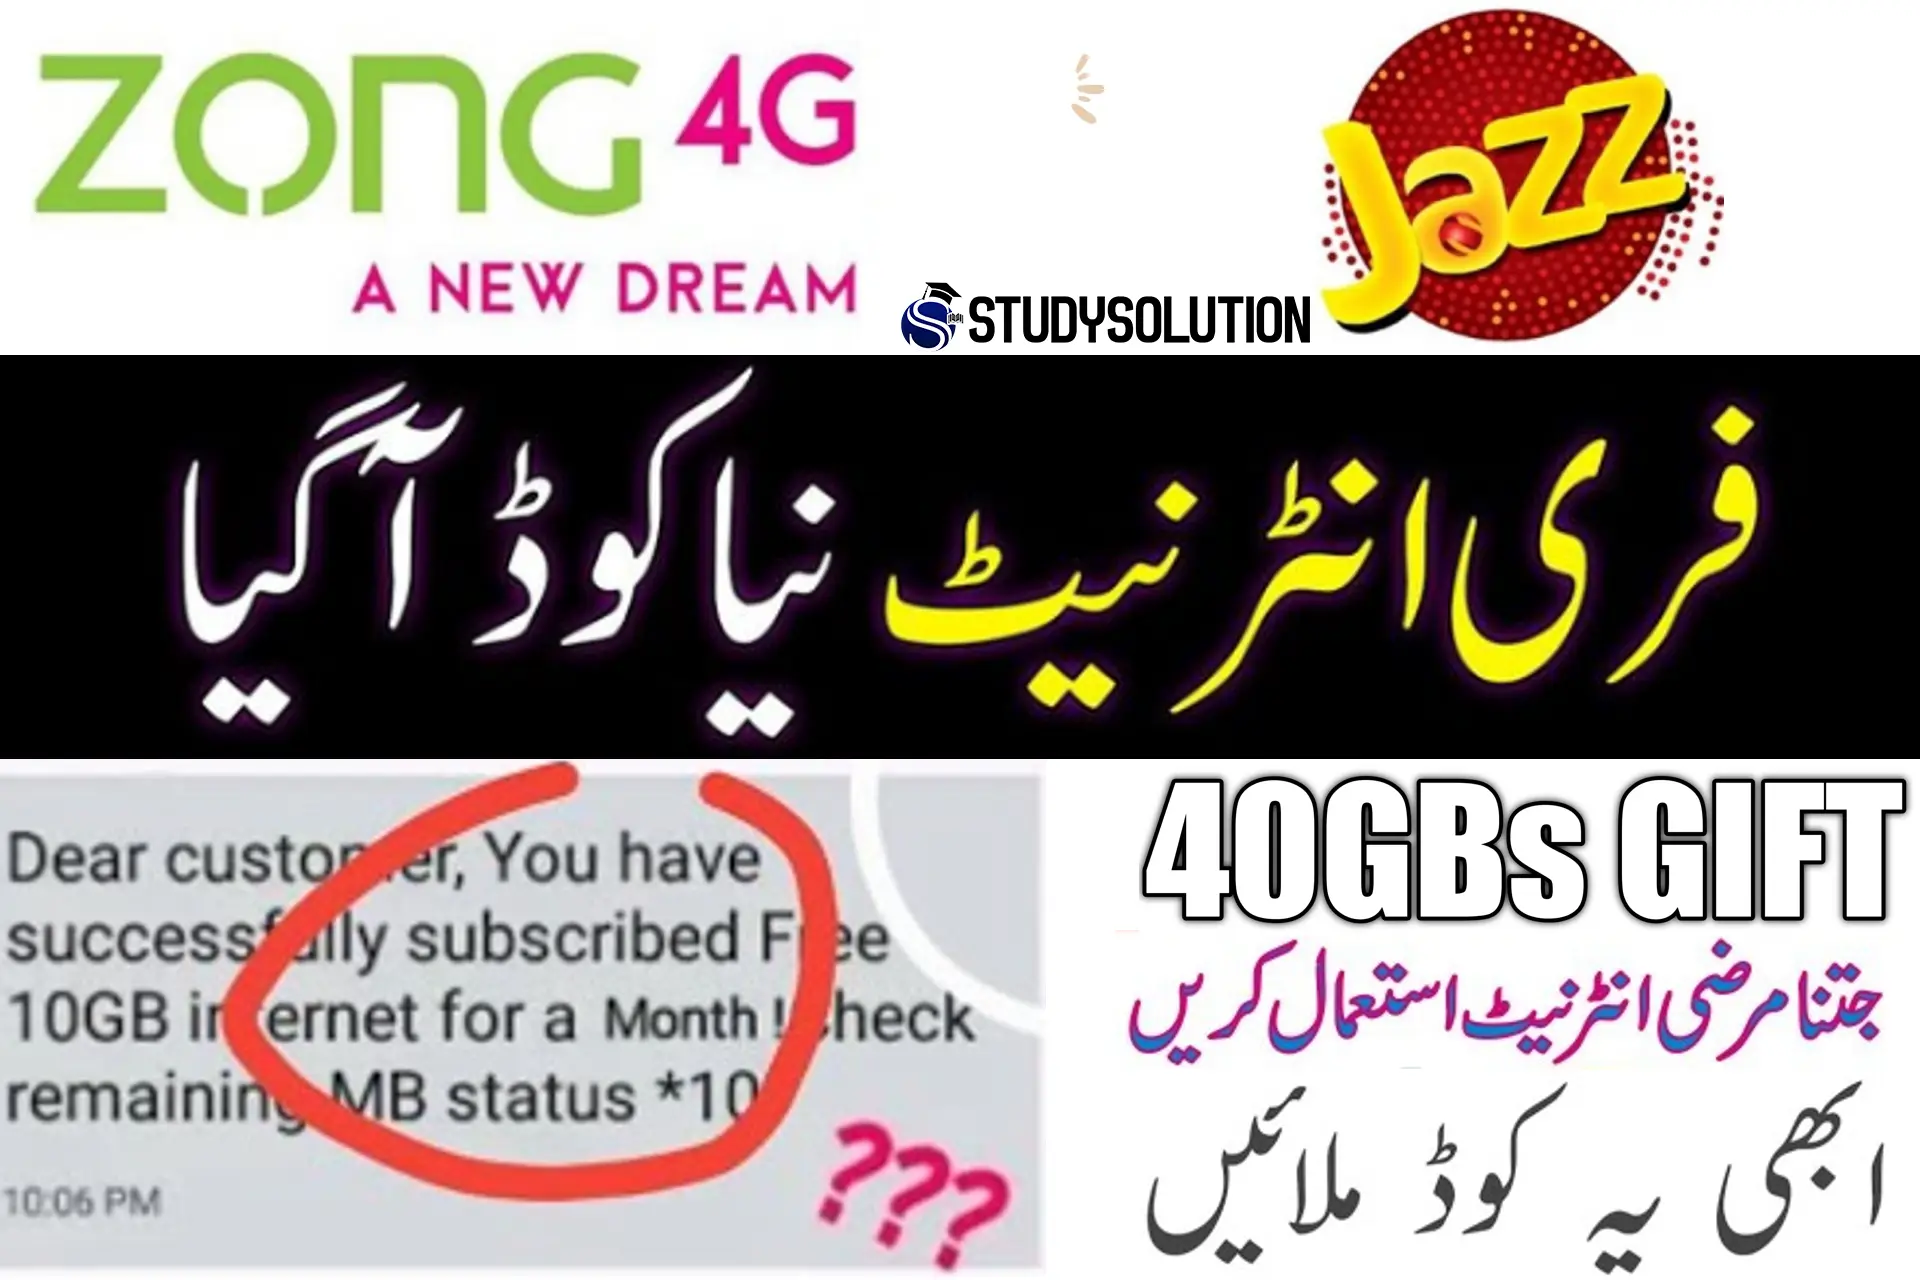 Jazz and Zong Free Internet Code